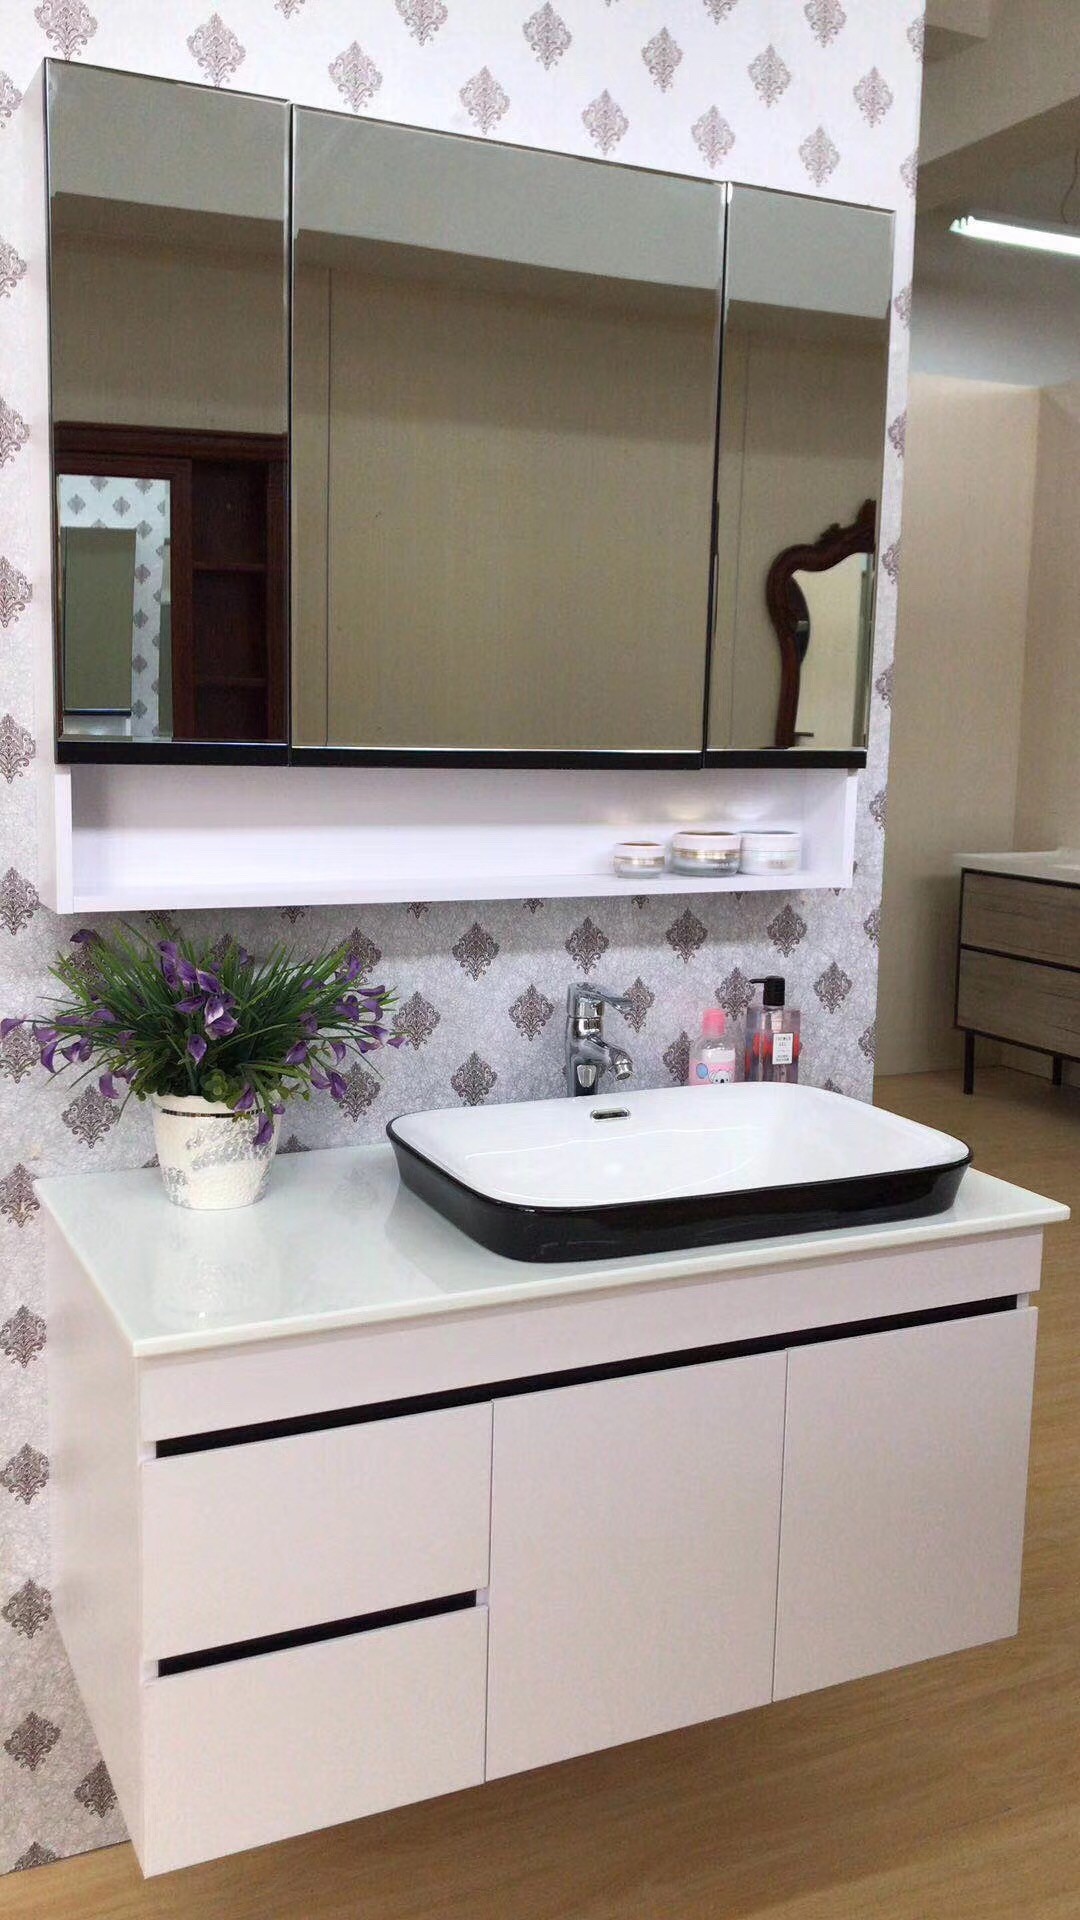 Quality Custom Made White Bathroom Vanity Cabinets / Units Single Basin Wall Mounted for sale